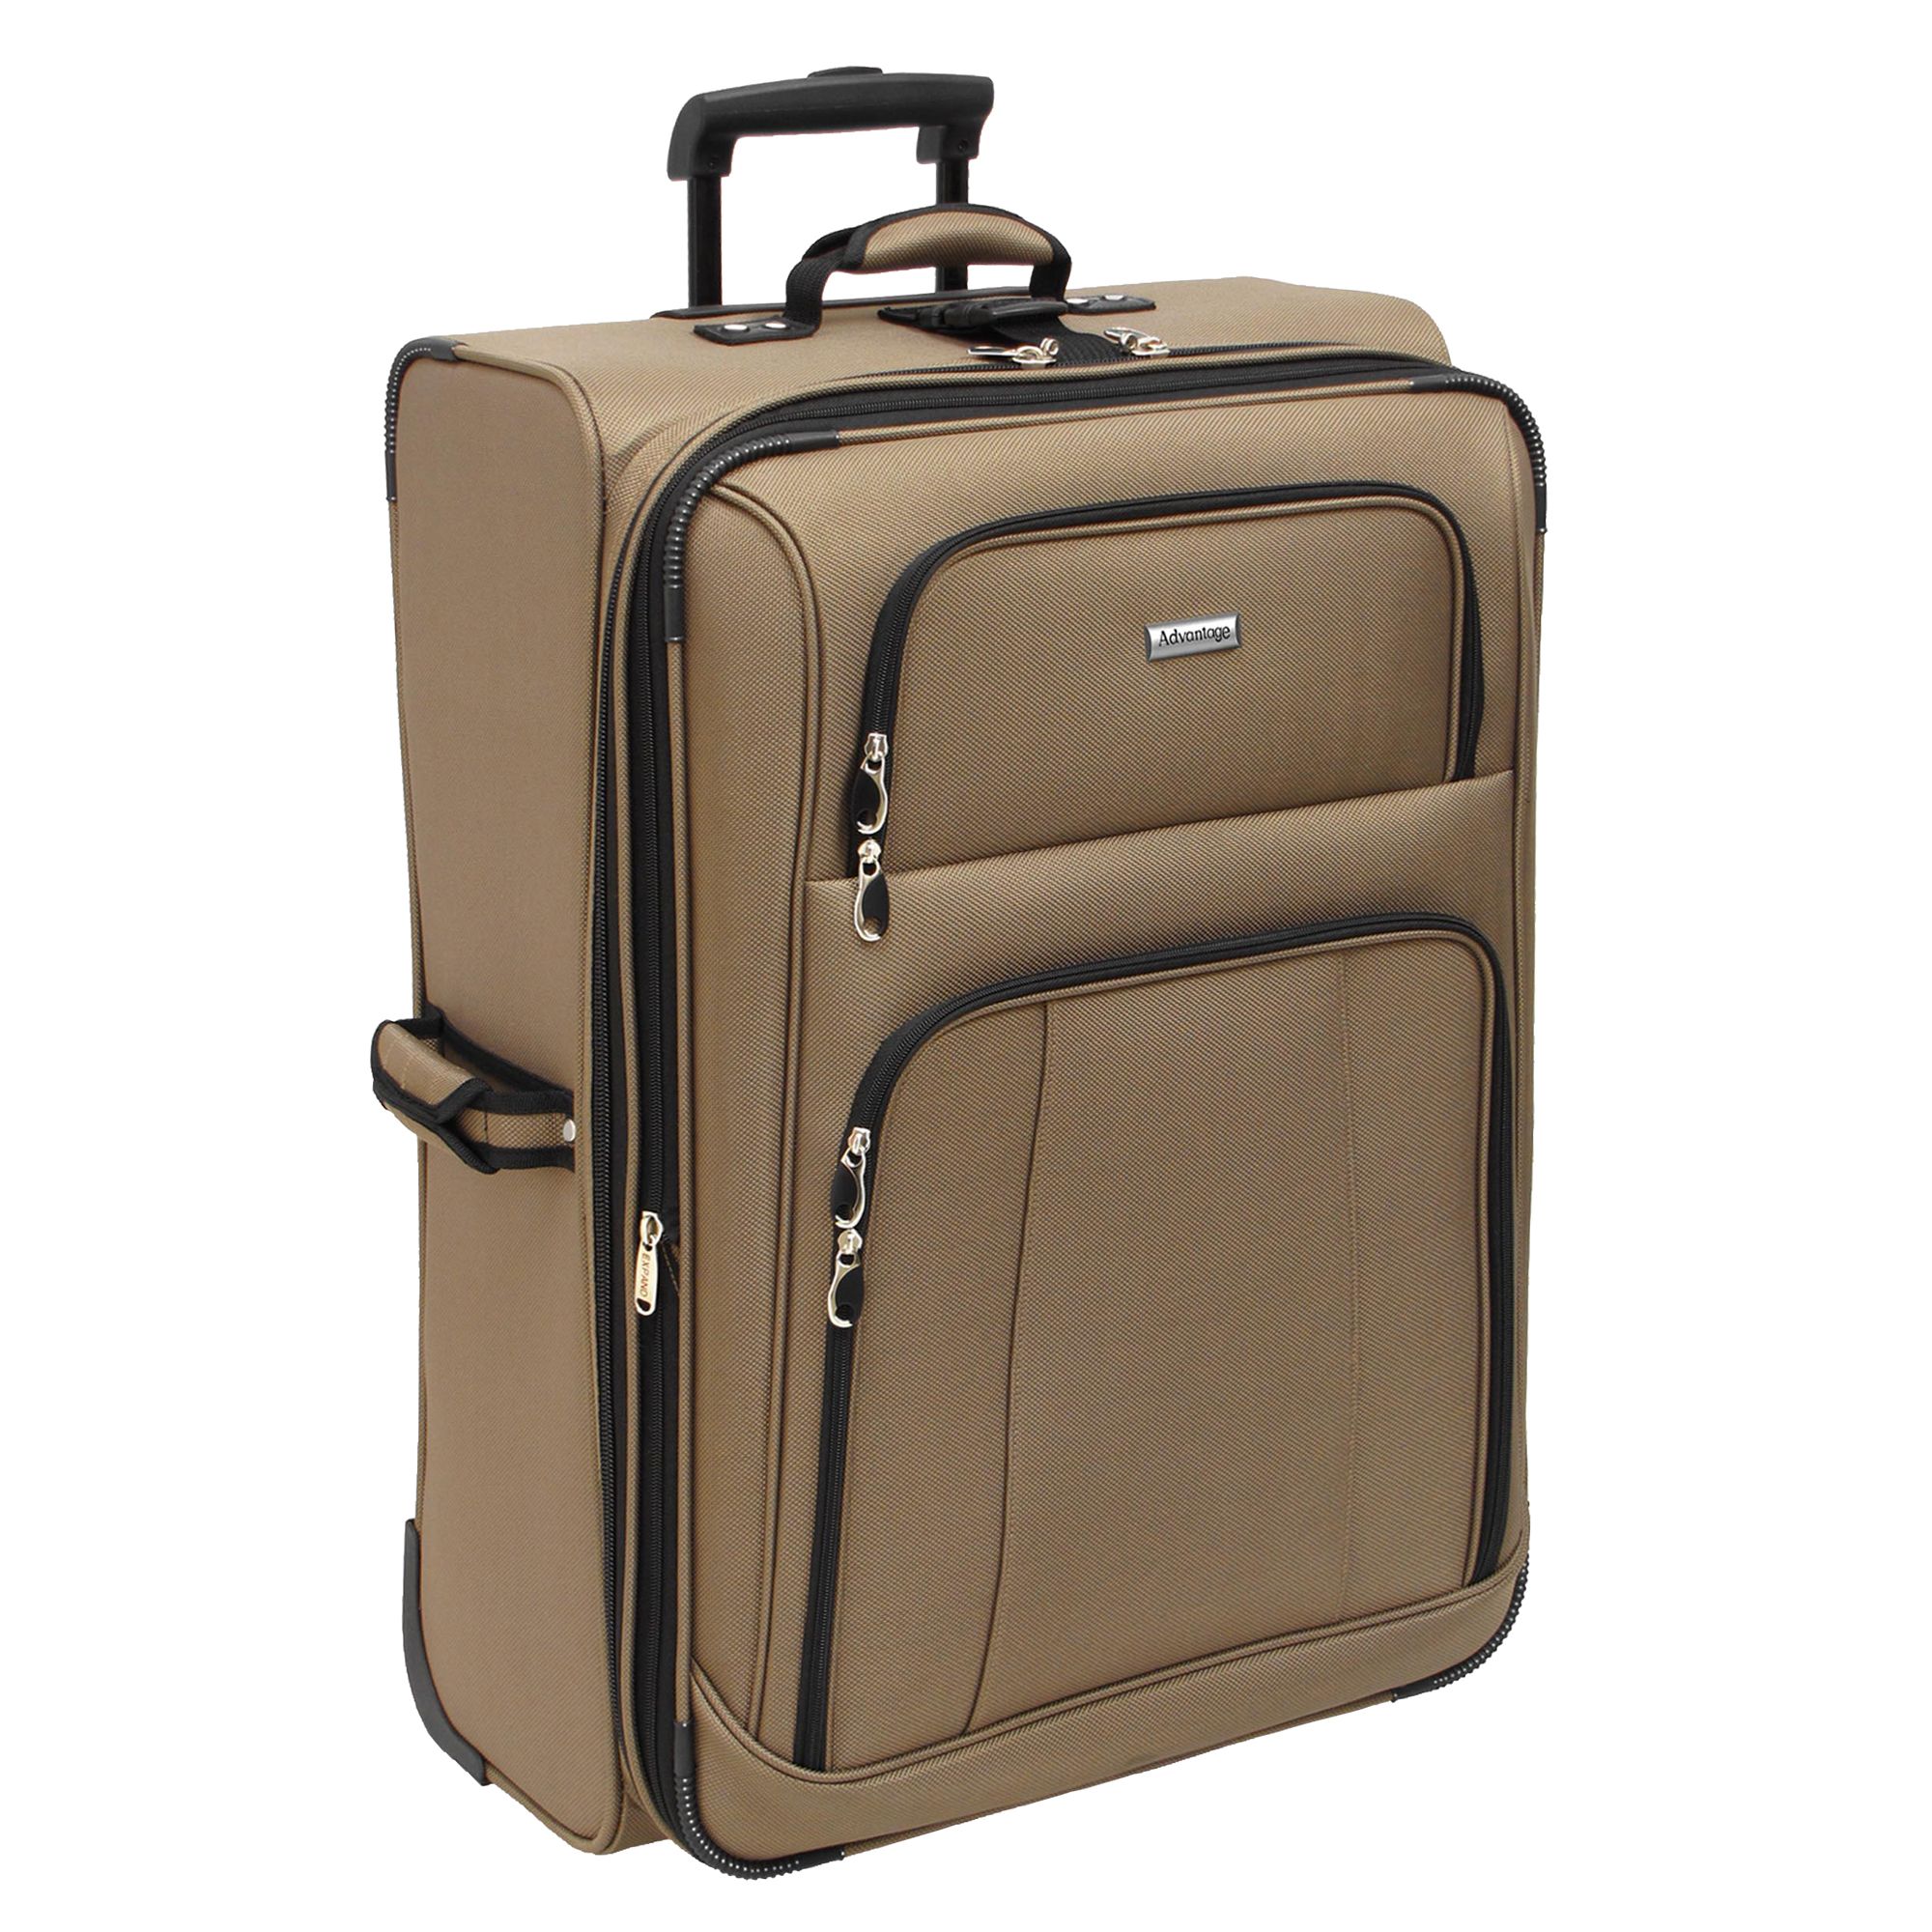 travel luggage lightweight suitcases